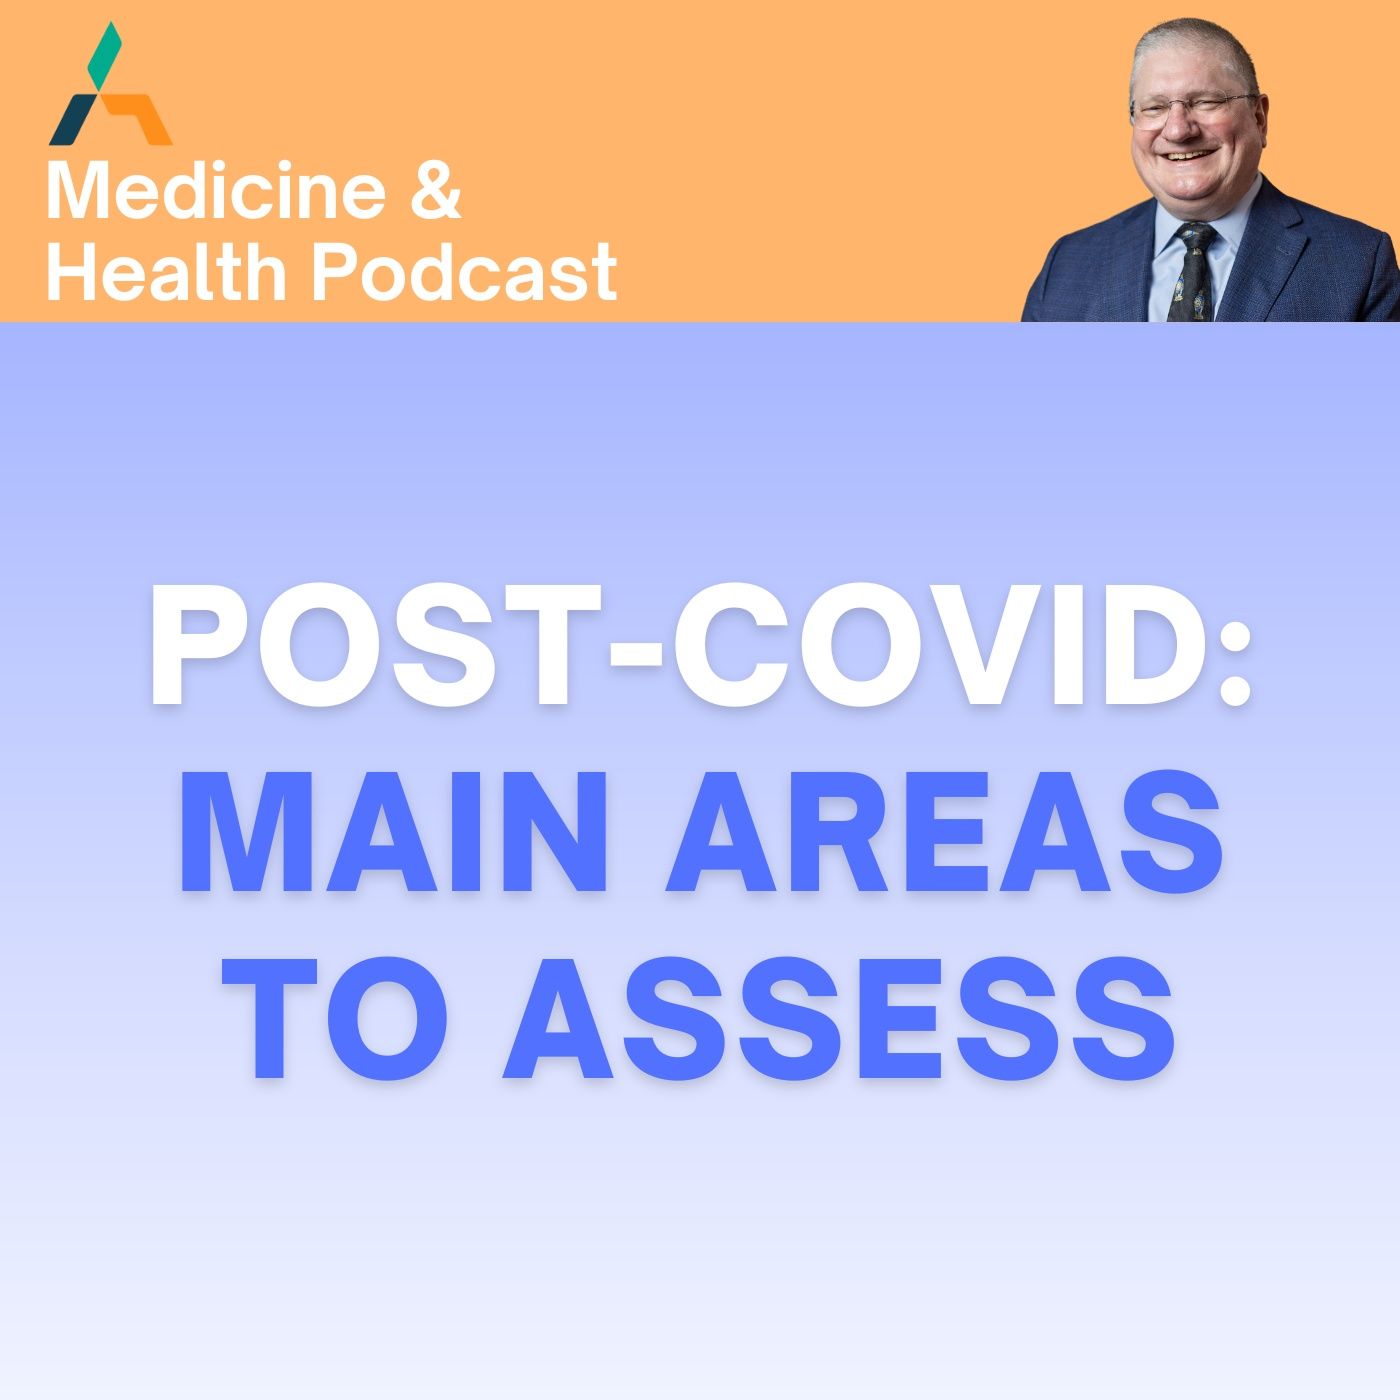 POST-COVID: MAIN AREAS TO ASSESS